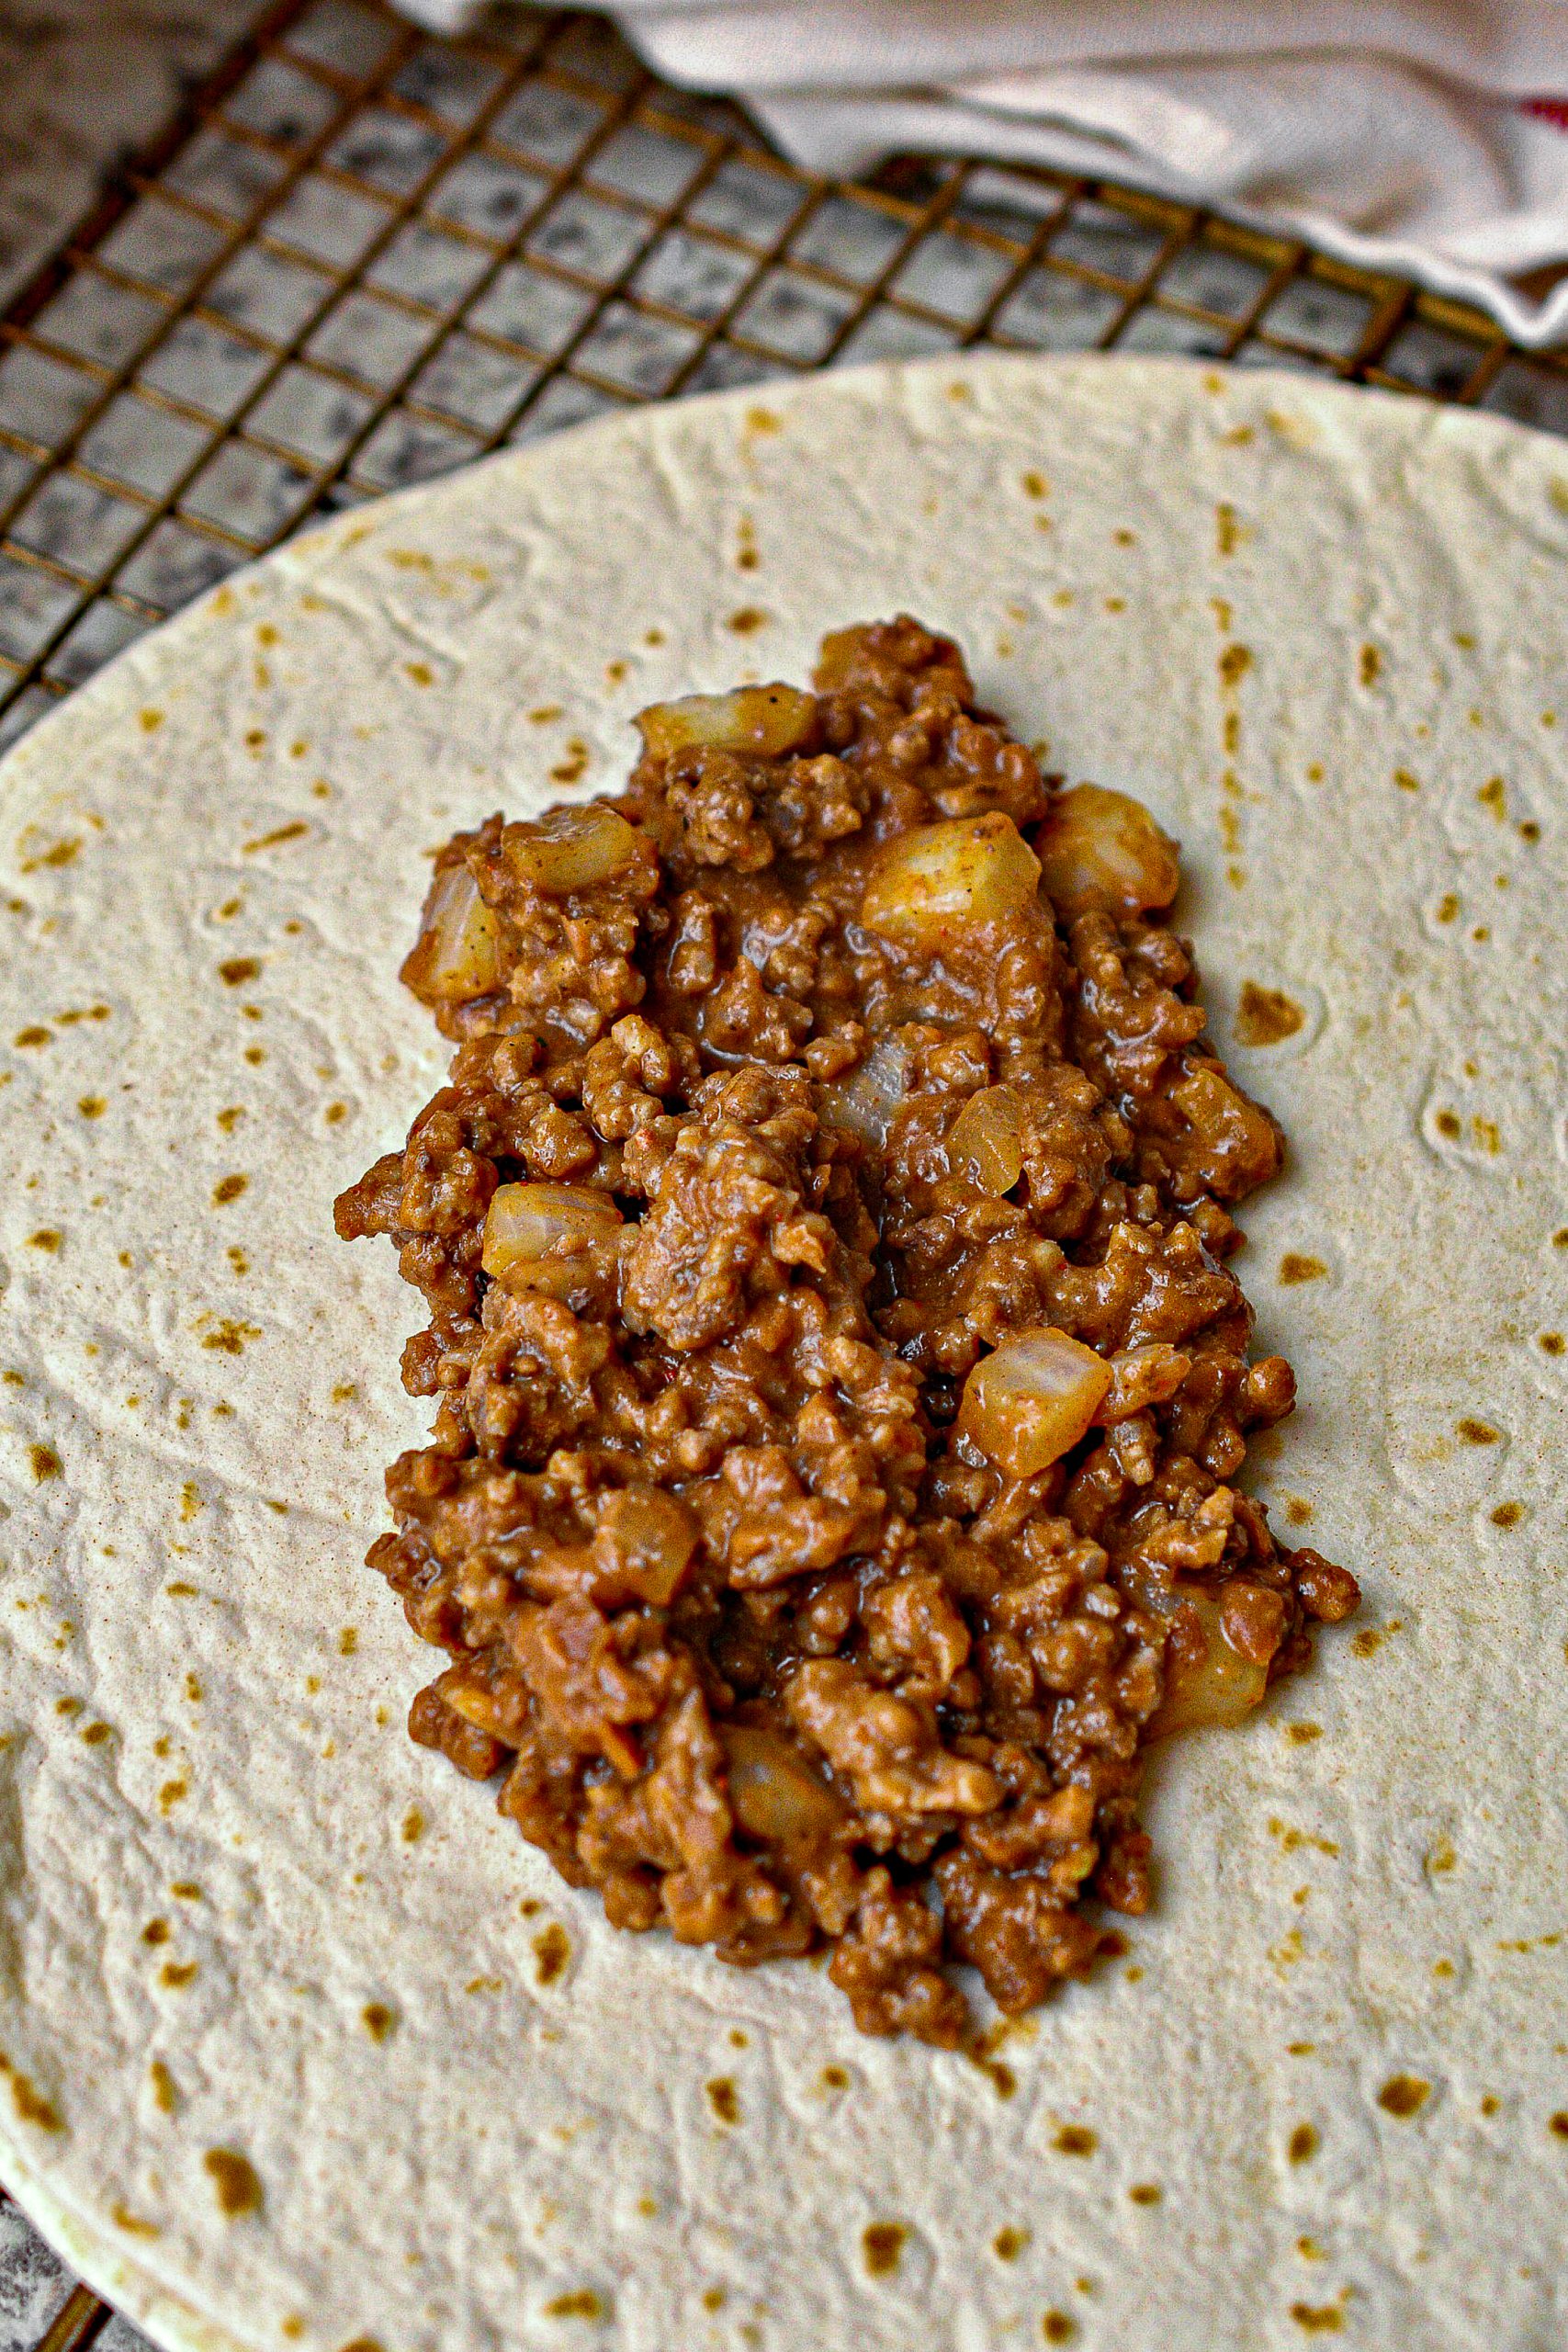 Put an even amount of filling into the center of the 10 tortillas.